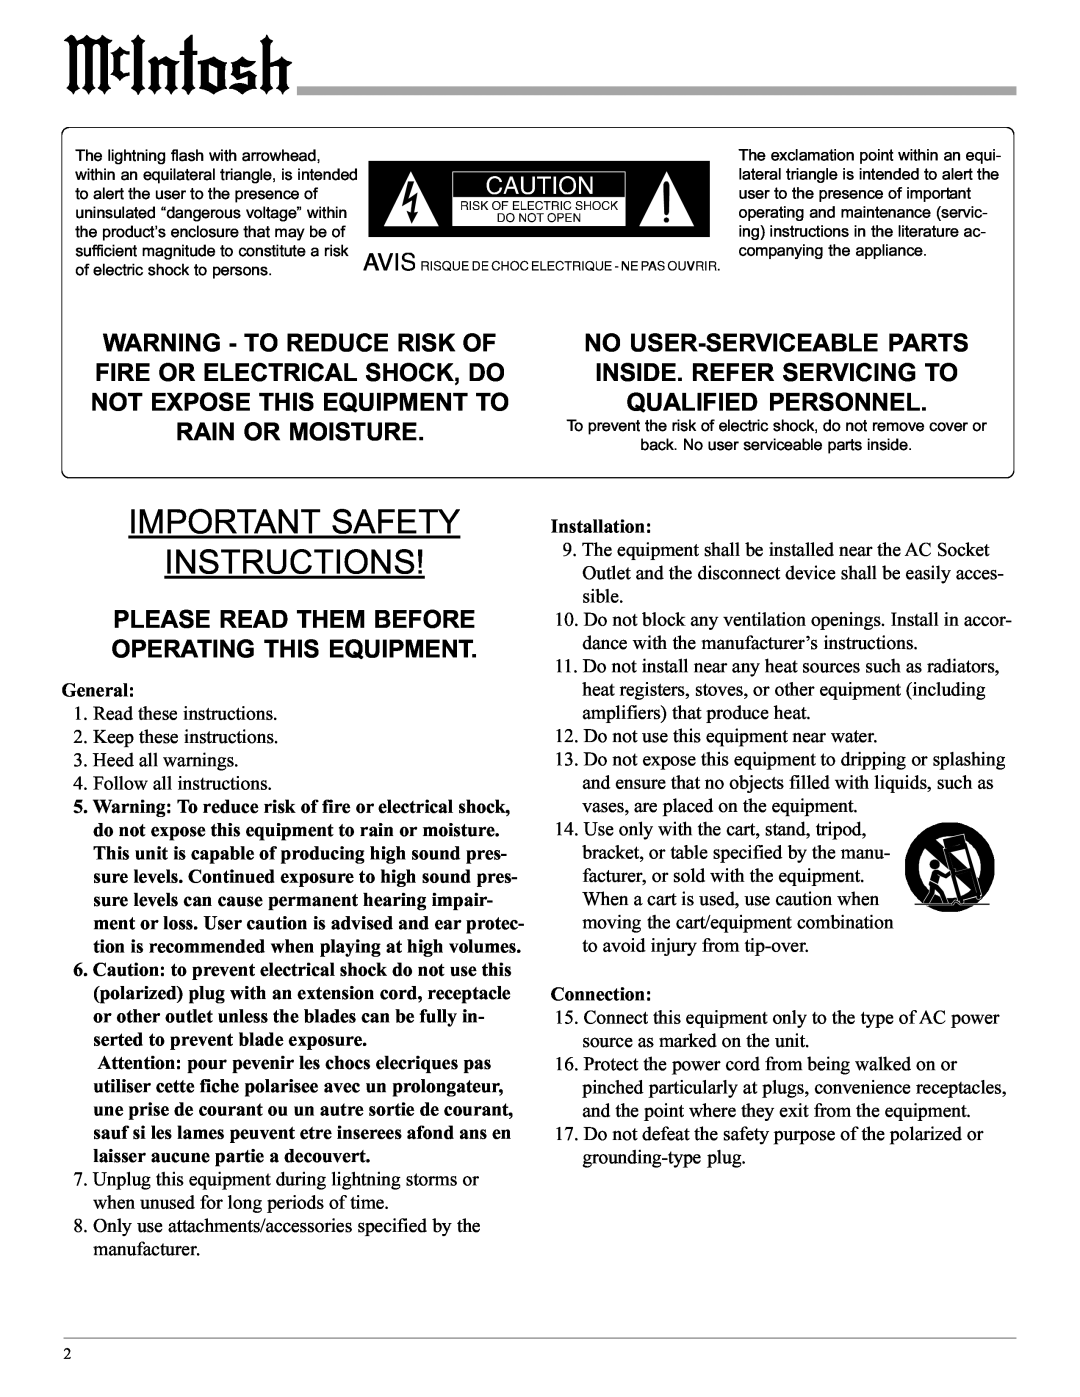 McIntosh MC206 manual Important Safety Instructions, Please Read Them Before Operating This Equipment 